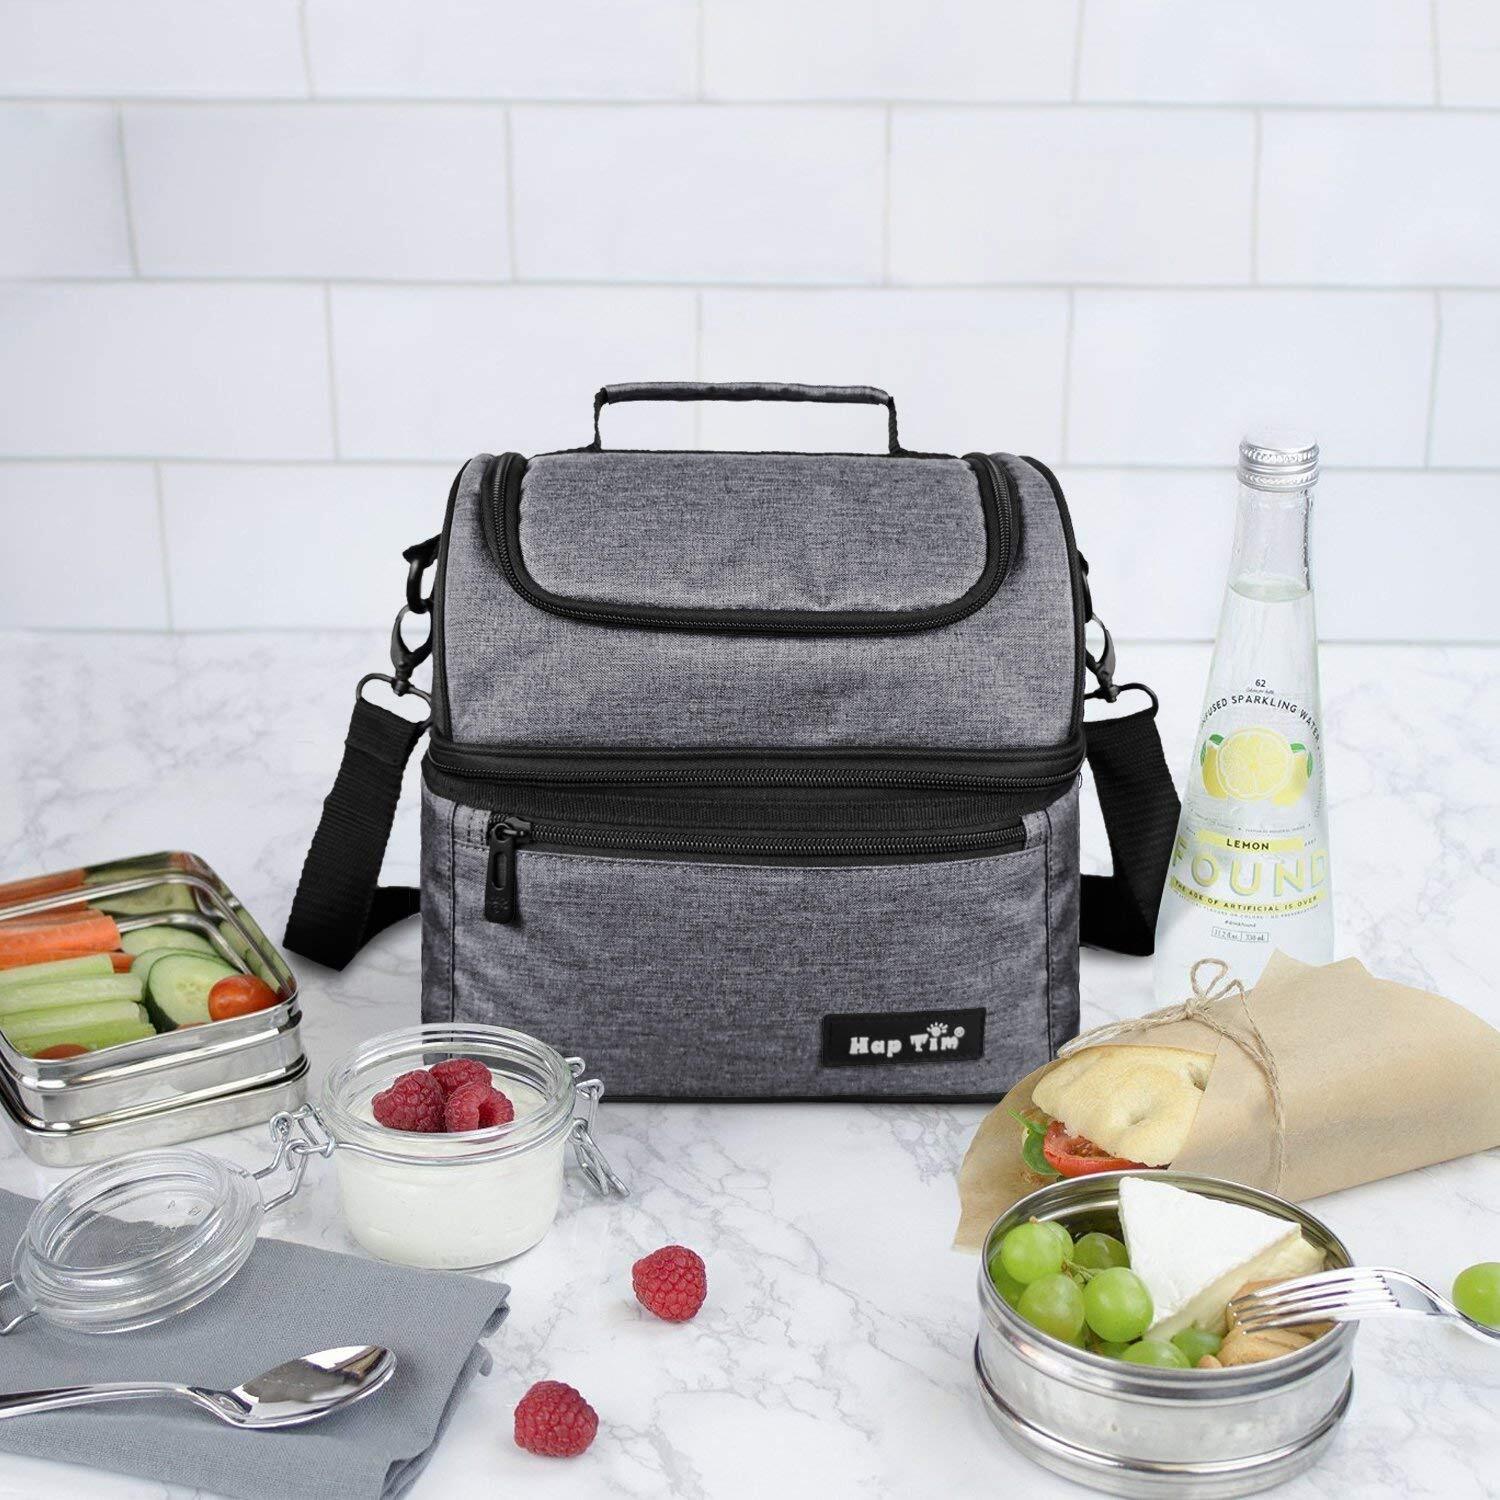 Insulated Coolers & Lunchboxes